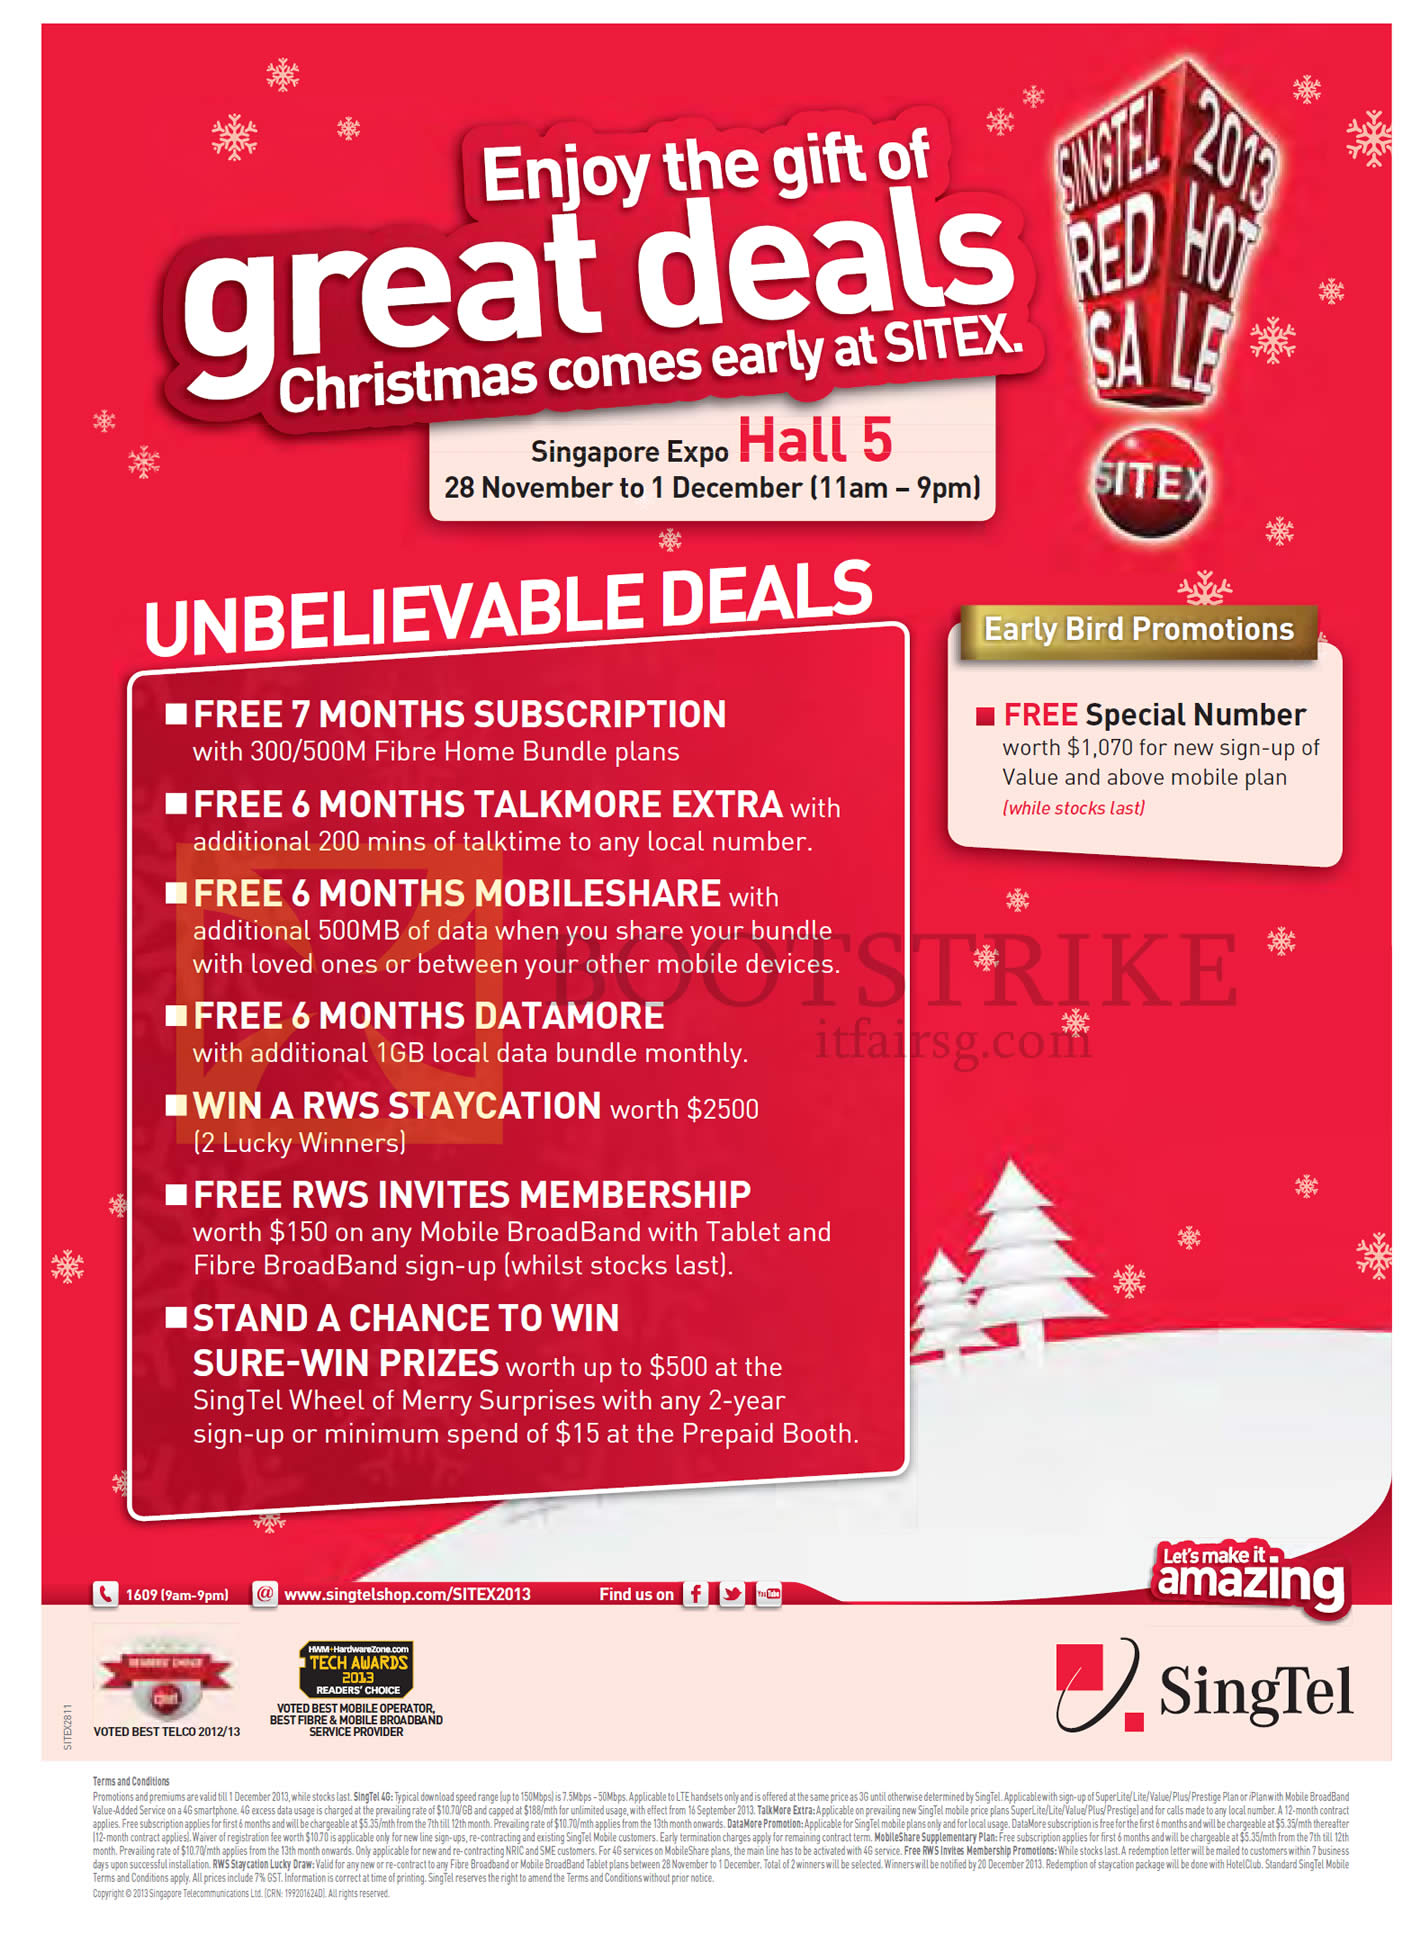 SITEX 2013 price list image brochure of Singtel Booth Specials, Free 7 Months Subscription, Special Number, Free 6mths Talkmore Extra, Free 6mths Datamore